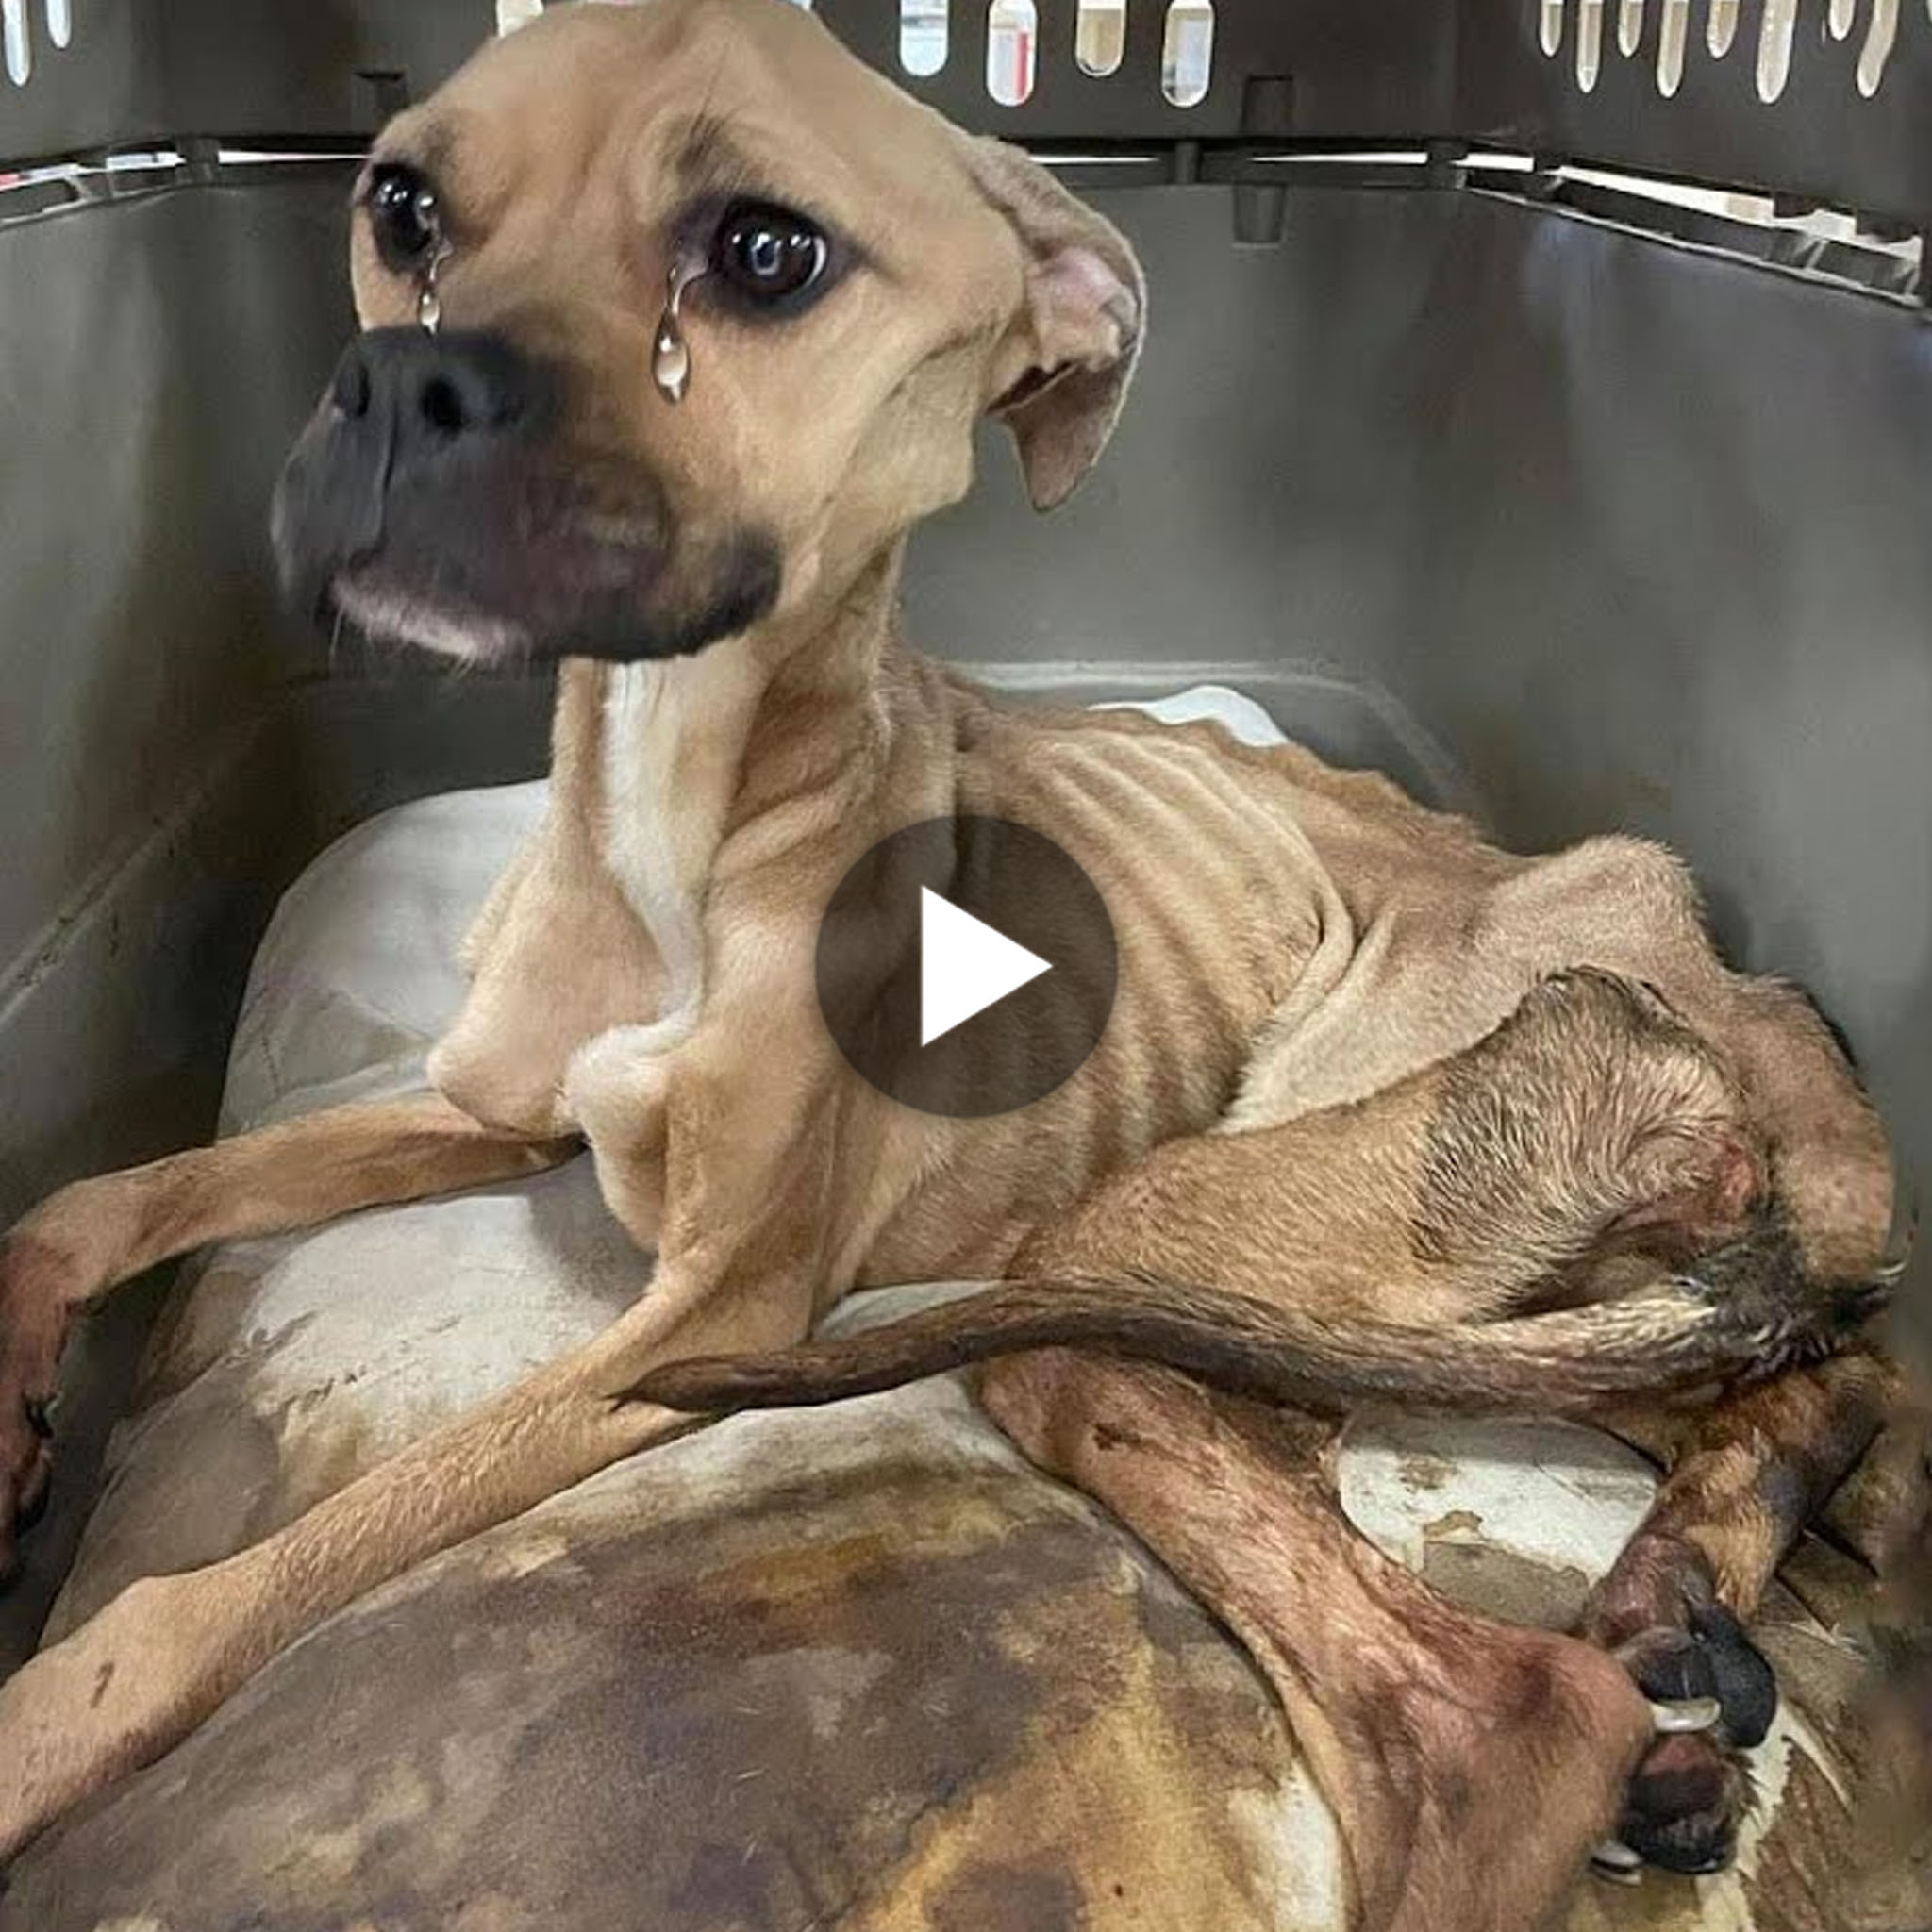 tho “Witness the rescue of a dog abandoned amidst dry bones in a desolate place. Tears fall from the dog’s eyes as the rescue team arrives promptly, showcasing the transformative power of compassion in the face of abandonment.” tho